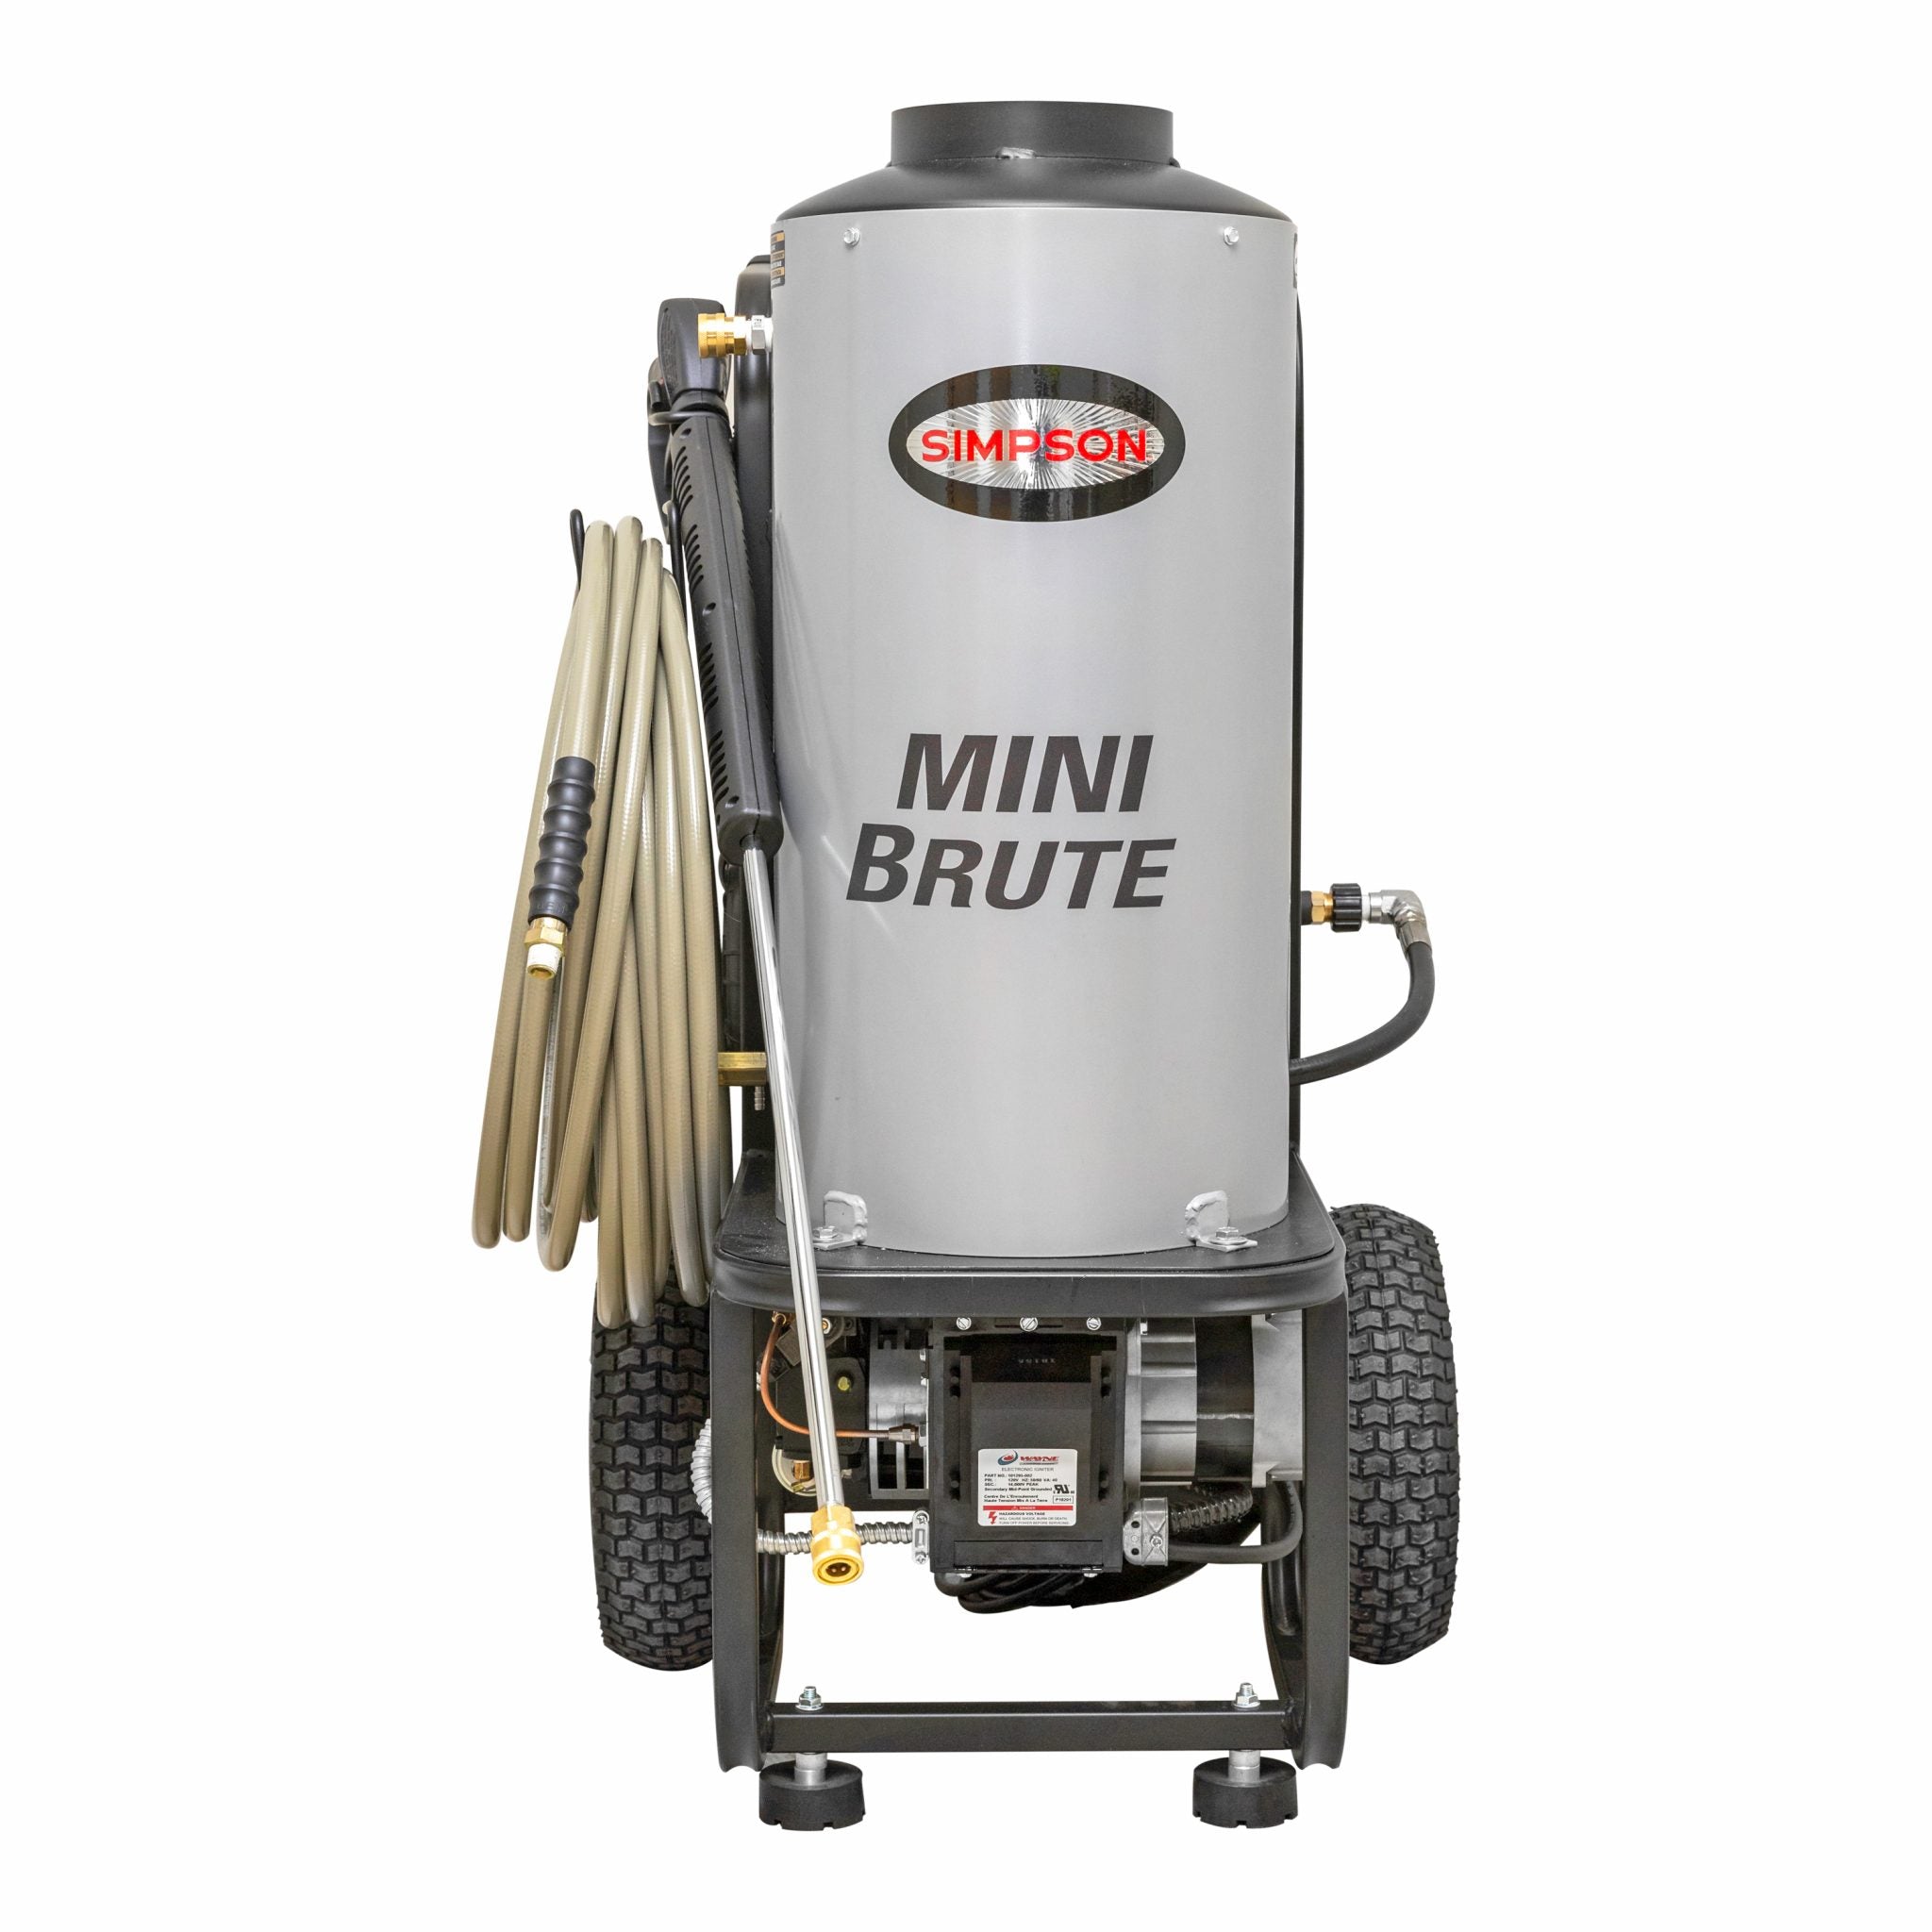 Simpson, Simpson MB1518 Brute Series Pressure Washer 1500 PSI 1.8 GPM Hot Water Electric New